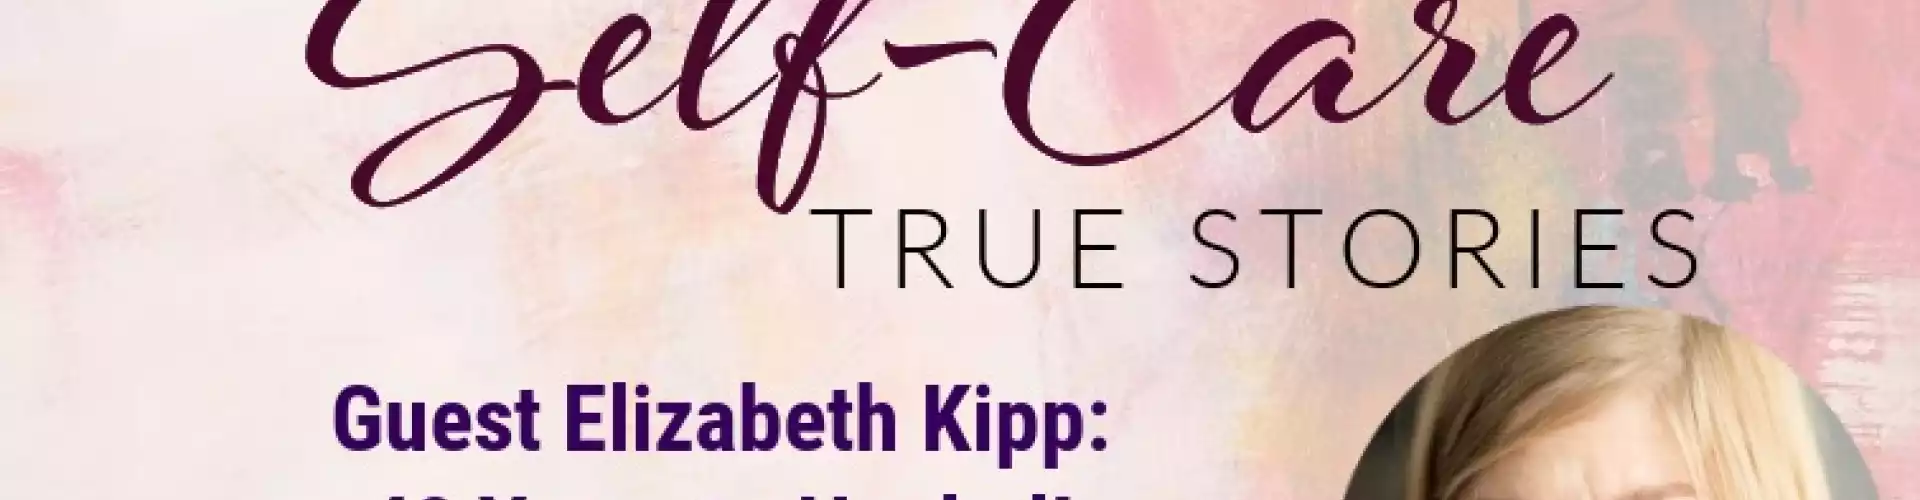 Self-Care True Stories with Guest Elizabeth Kipp: 40 Years to Healed!